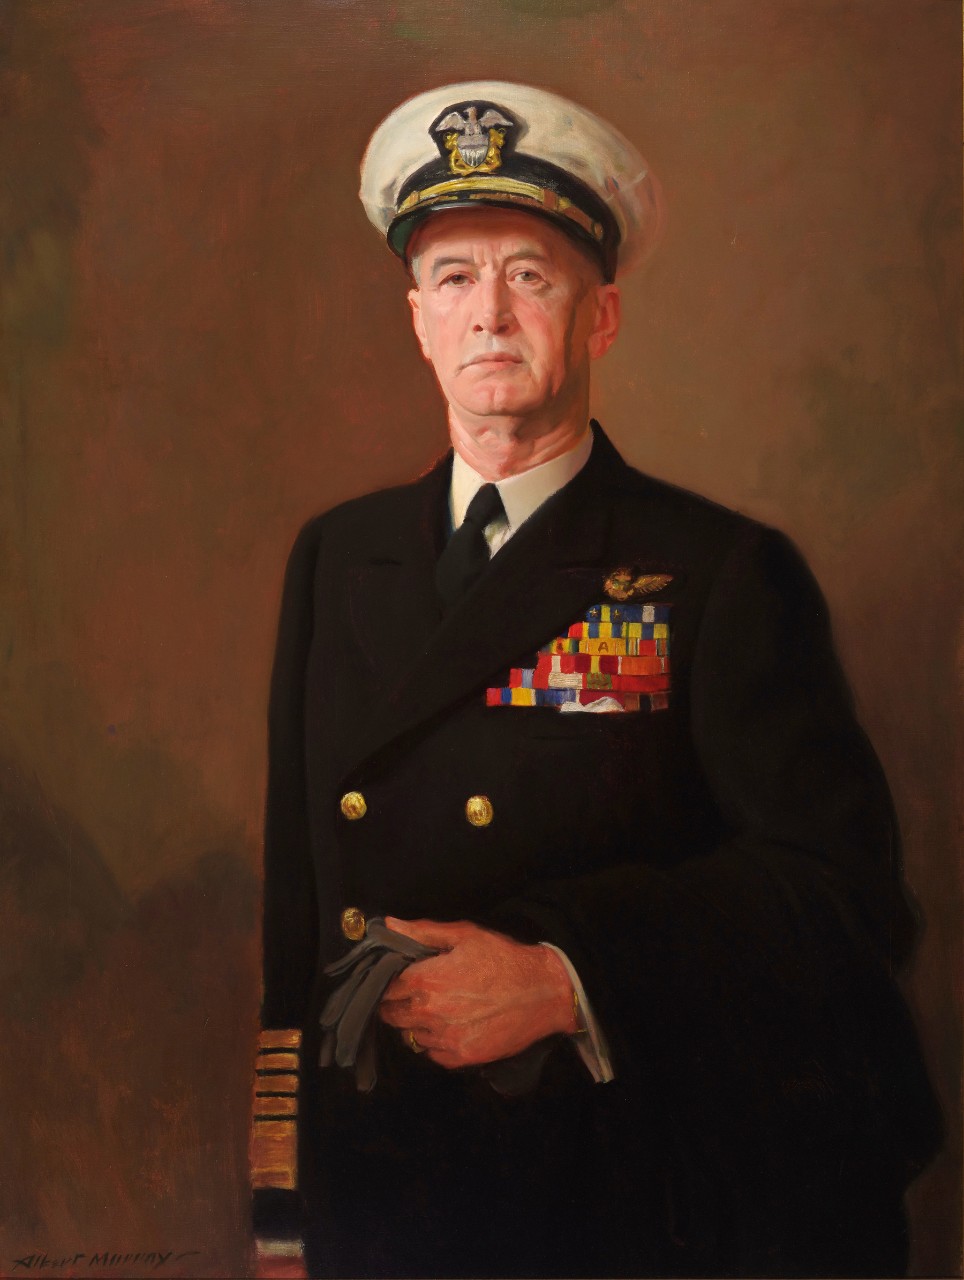 Admiral Ernest J King in his dress blues wearing a hat and holding a pair of gloves